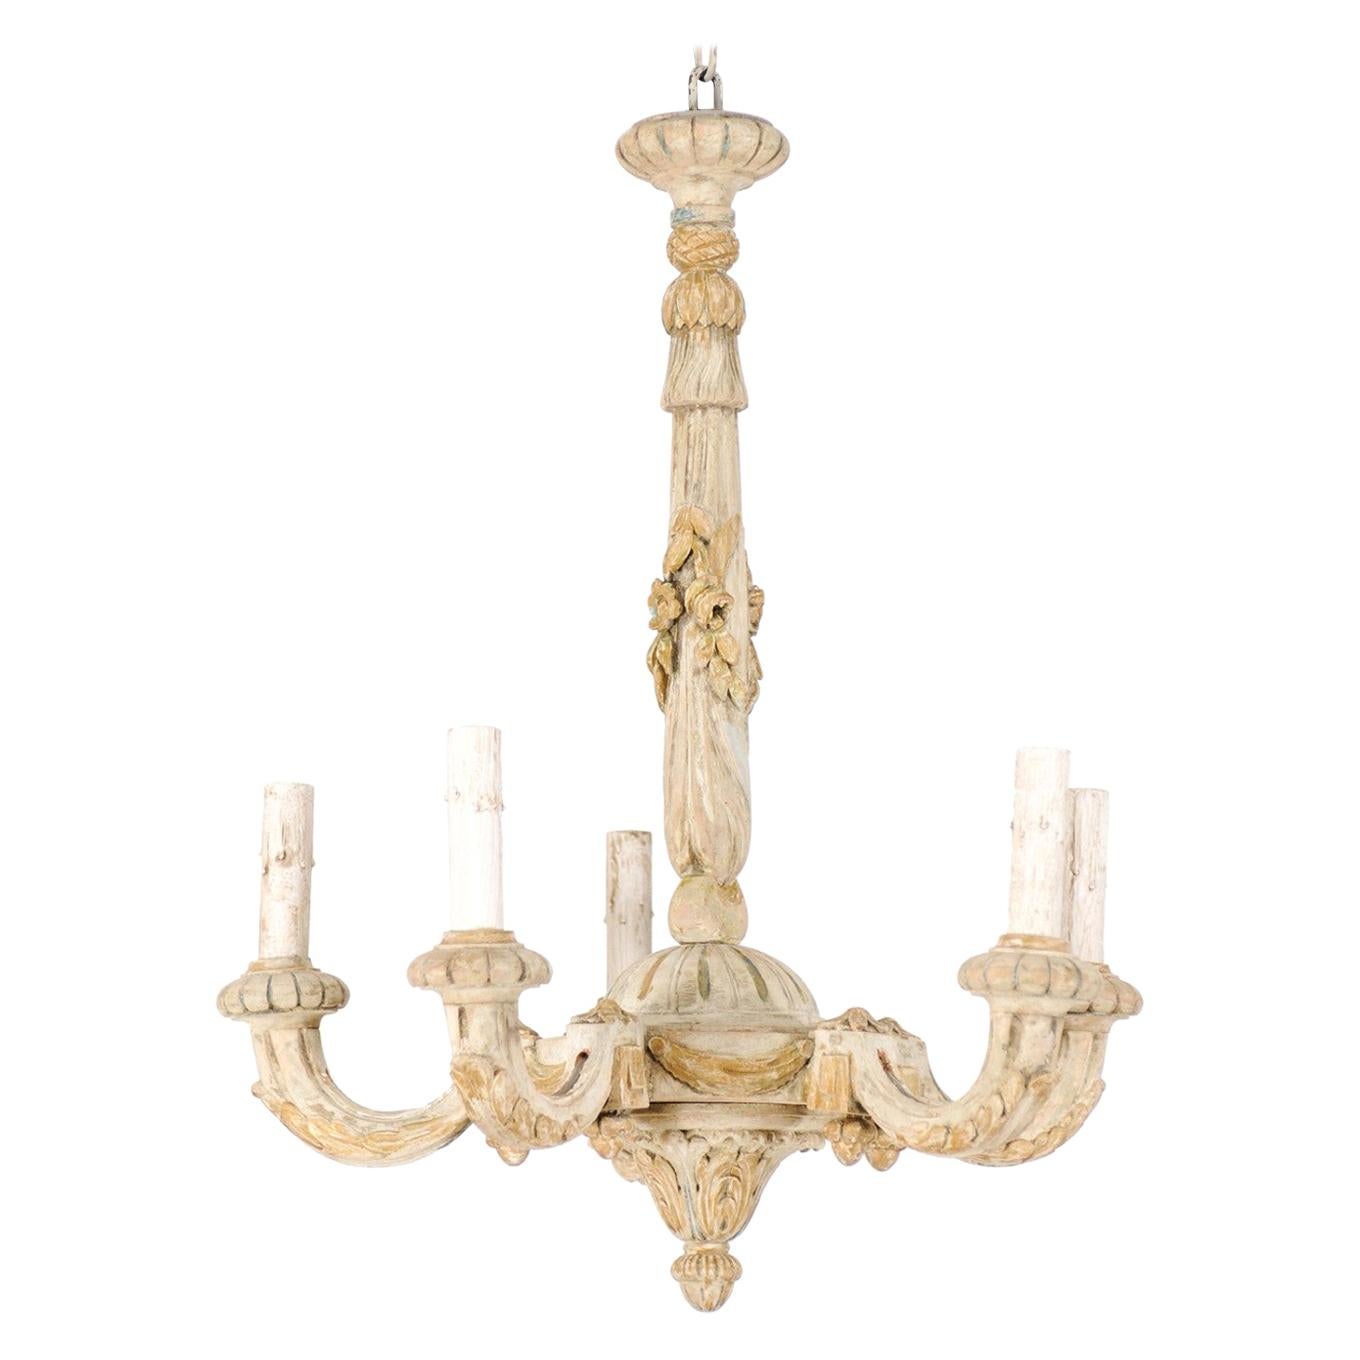 French Five-Light Carved Wood Chandelier with Floral & Foliage Motif, Cute Size